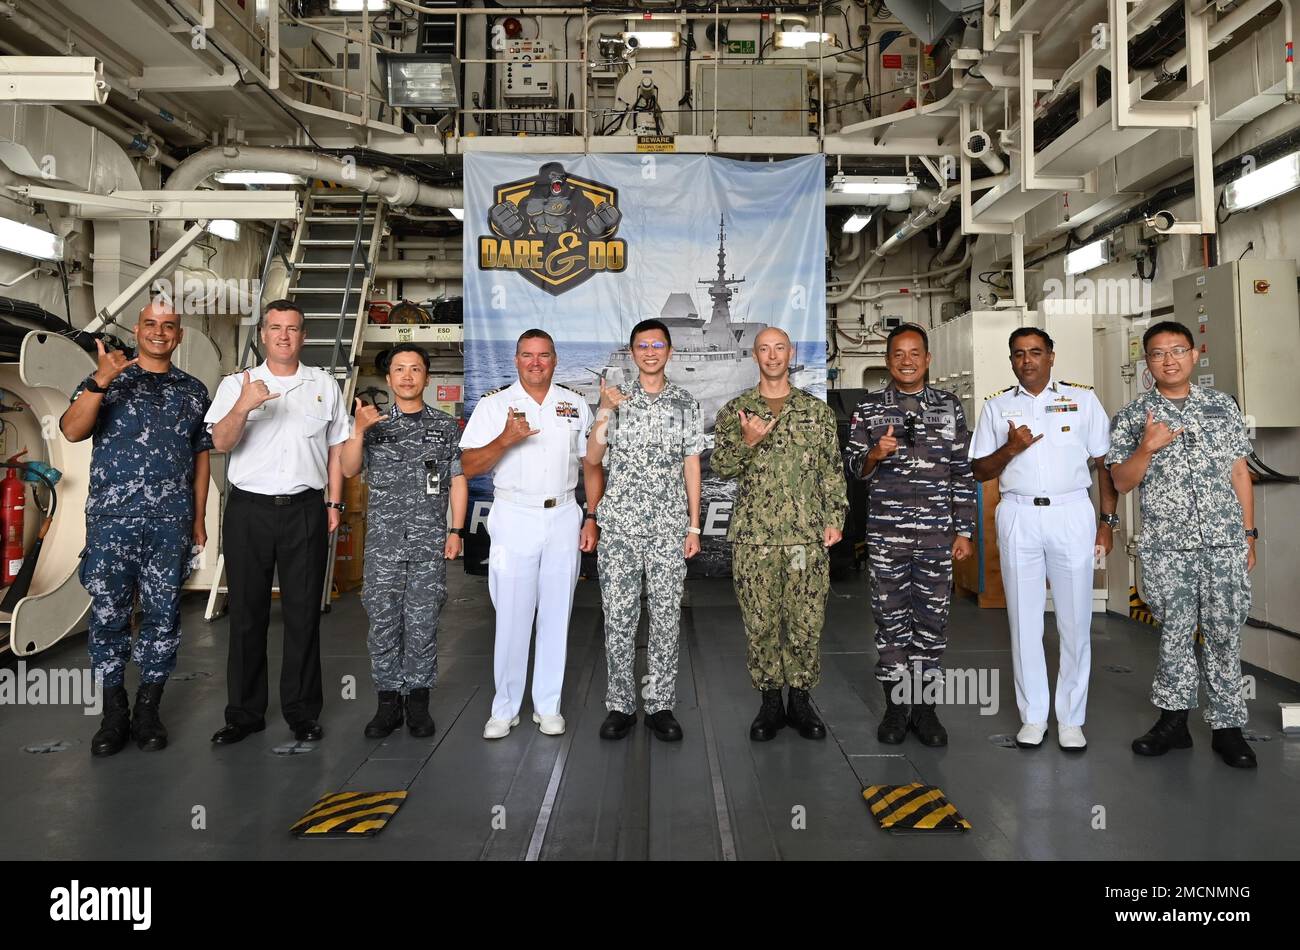 220707-N-SG068-1002-SG PEARL HARBOR (July 7, 2022) CTG176.3 and respective Commanding Officers from TG176.3 pose for a group photo during a luncheon hosted aboard Republic of Singapore Navy guided missile frigate RSS Intrepid (69) during Rim of the Pacific (RIMPAC) 2022. Twenty-six nations, 38 ships, four submarines, more than 170 aircraft and 25,000 personnel are participating in RIMPAC from June 29 to Aug. 4 in and around the Hawaiian Islands and Southern California. The world's largest international maritime exercise, RIMPAC provides a unique training opportunity while fostering and sustain Stock Photo